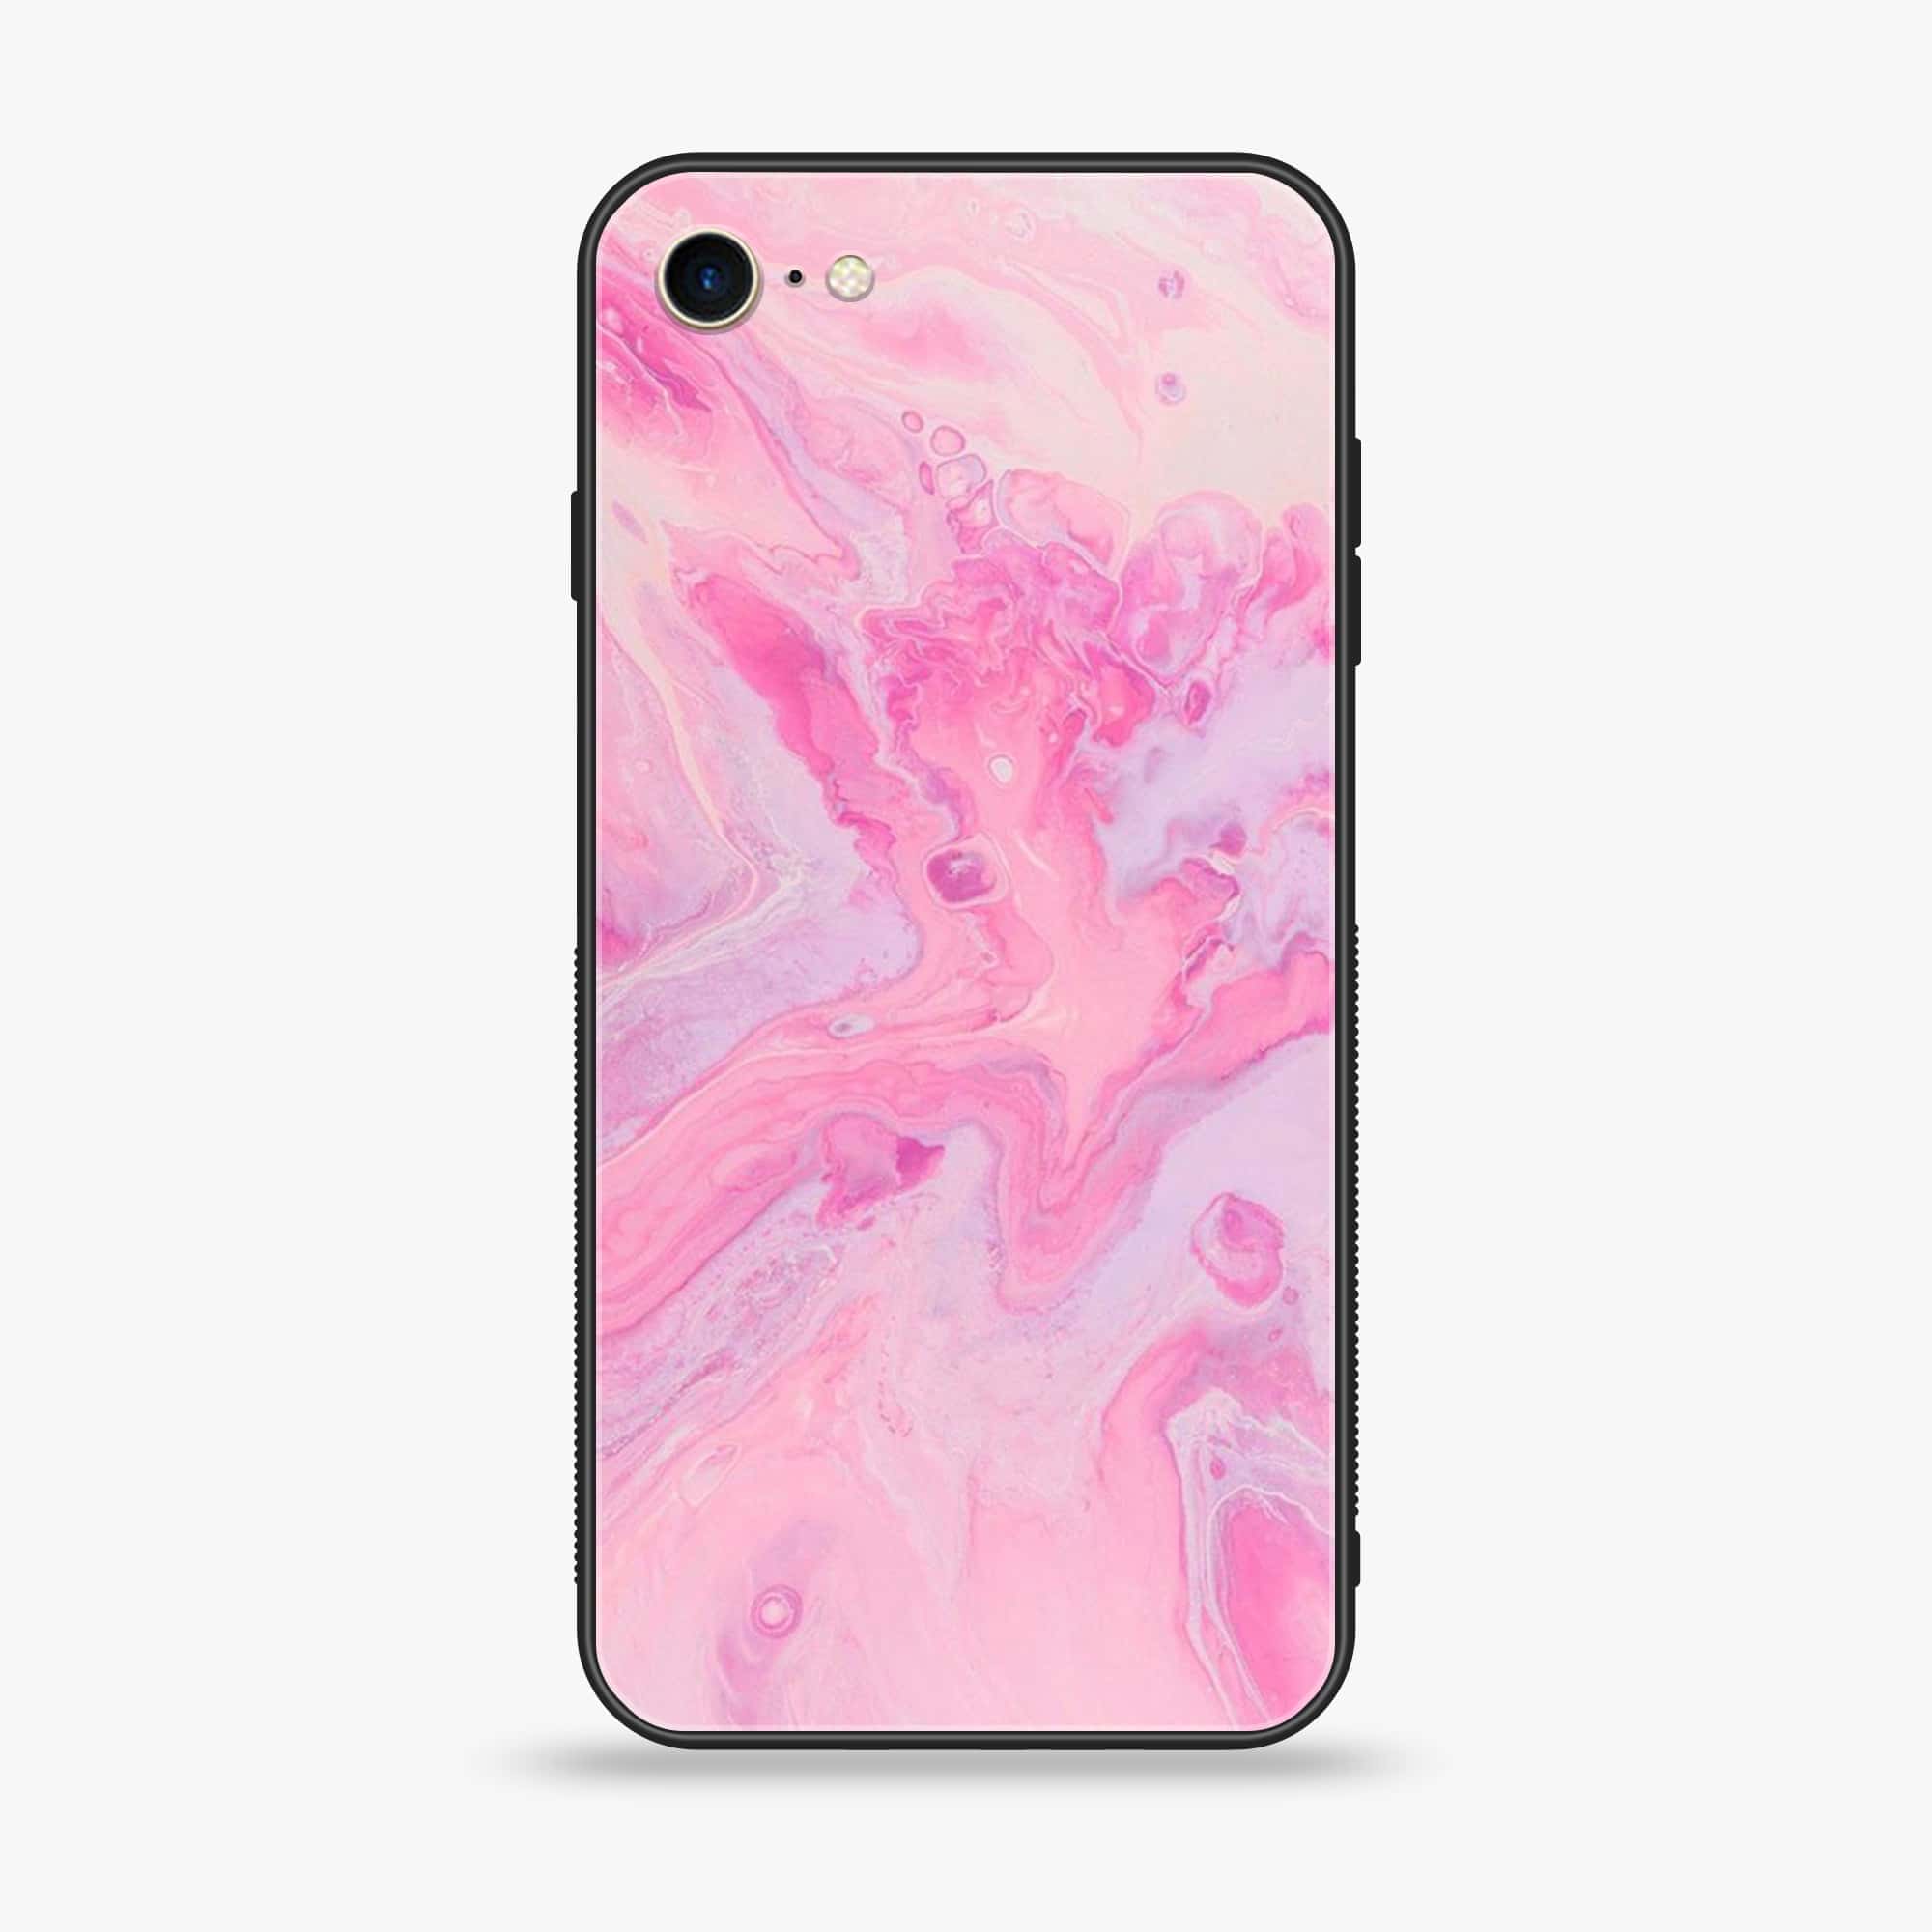 iPhone 6Plus  - Pink Marble Series - Premium Printed Glass soft Bumper shock Proof Case